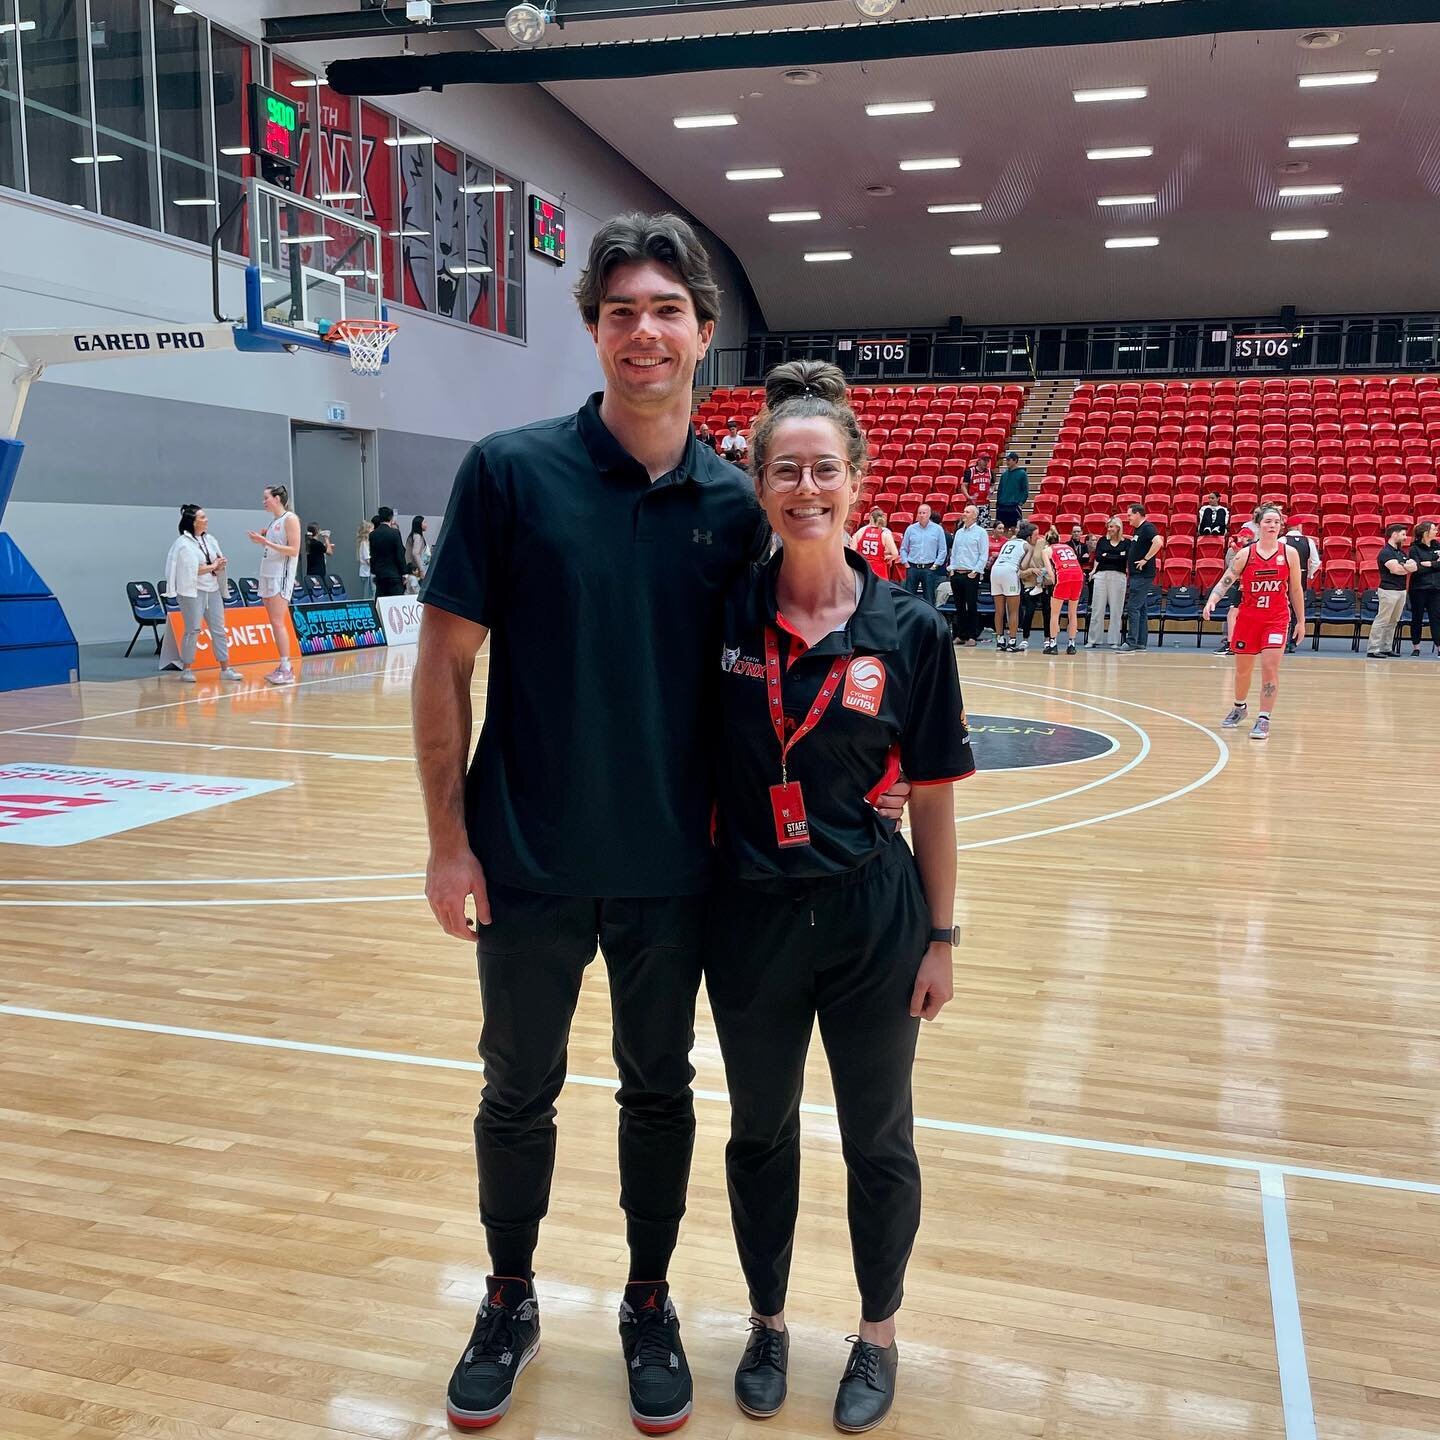 WNBL SHOWDOWN 🏀

Last night Christal and Lachie got to work opposite against each other as the @perthlynx hosted the visiting @sydneyflamesofficial.

The Lynx pulled away in the last quarter to win 80-72! 

The Flames are back in town January 7th fo